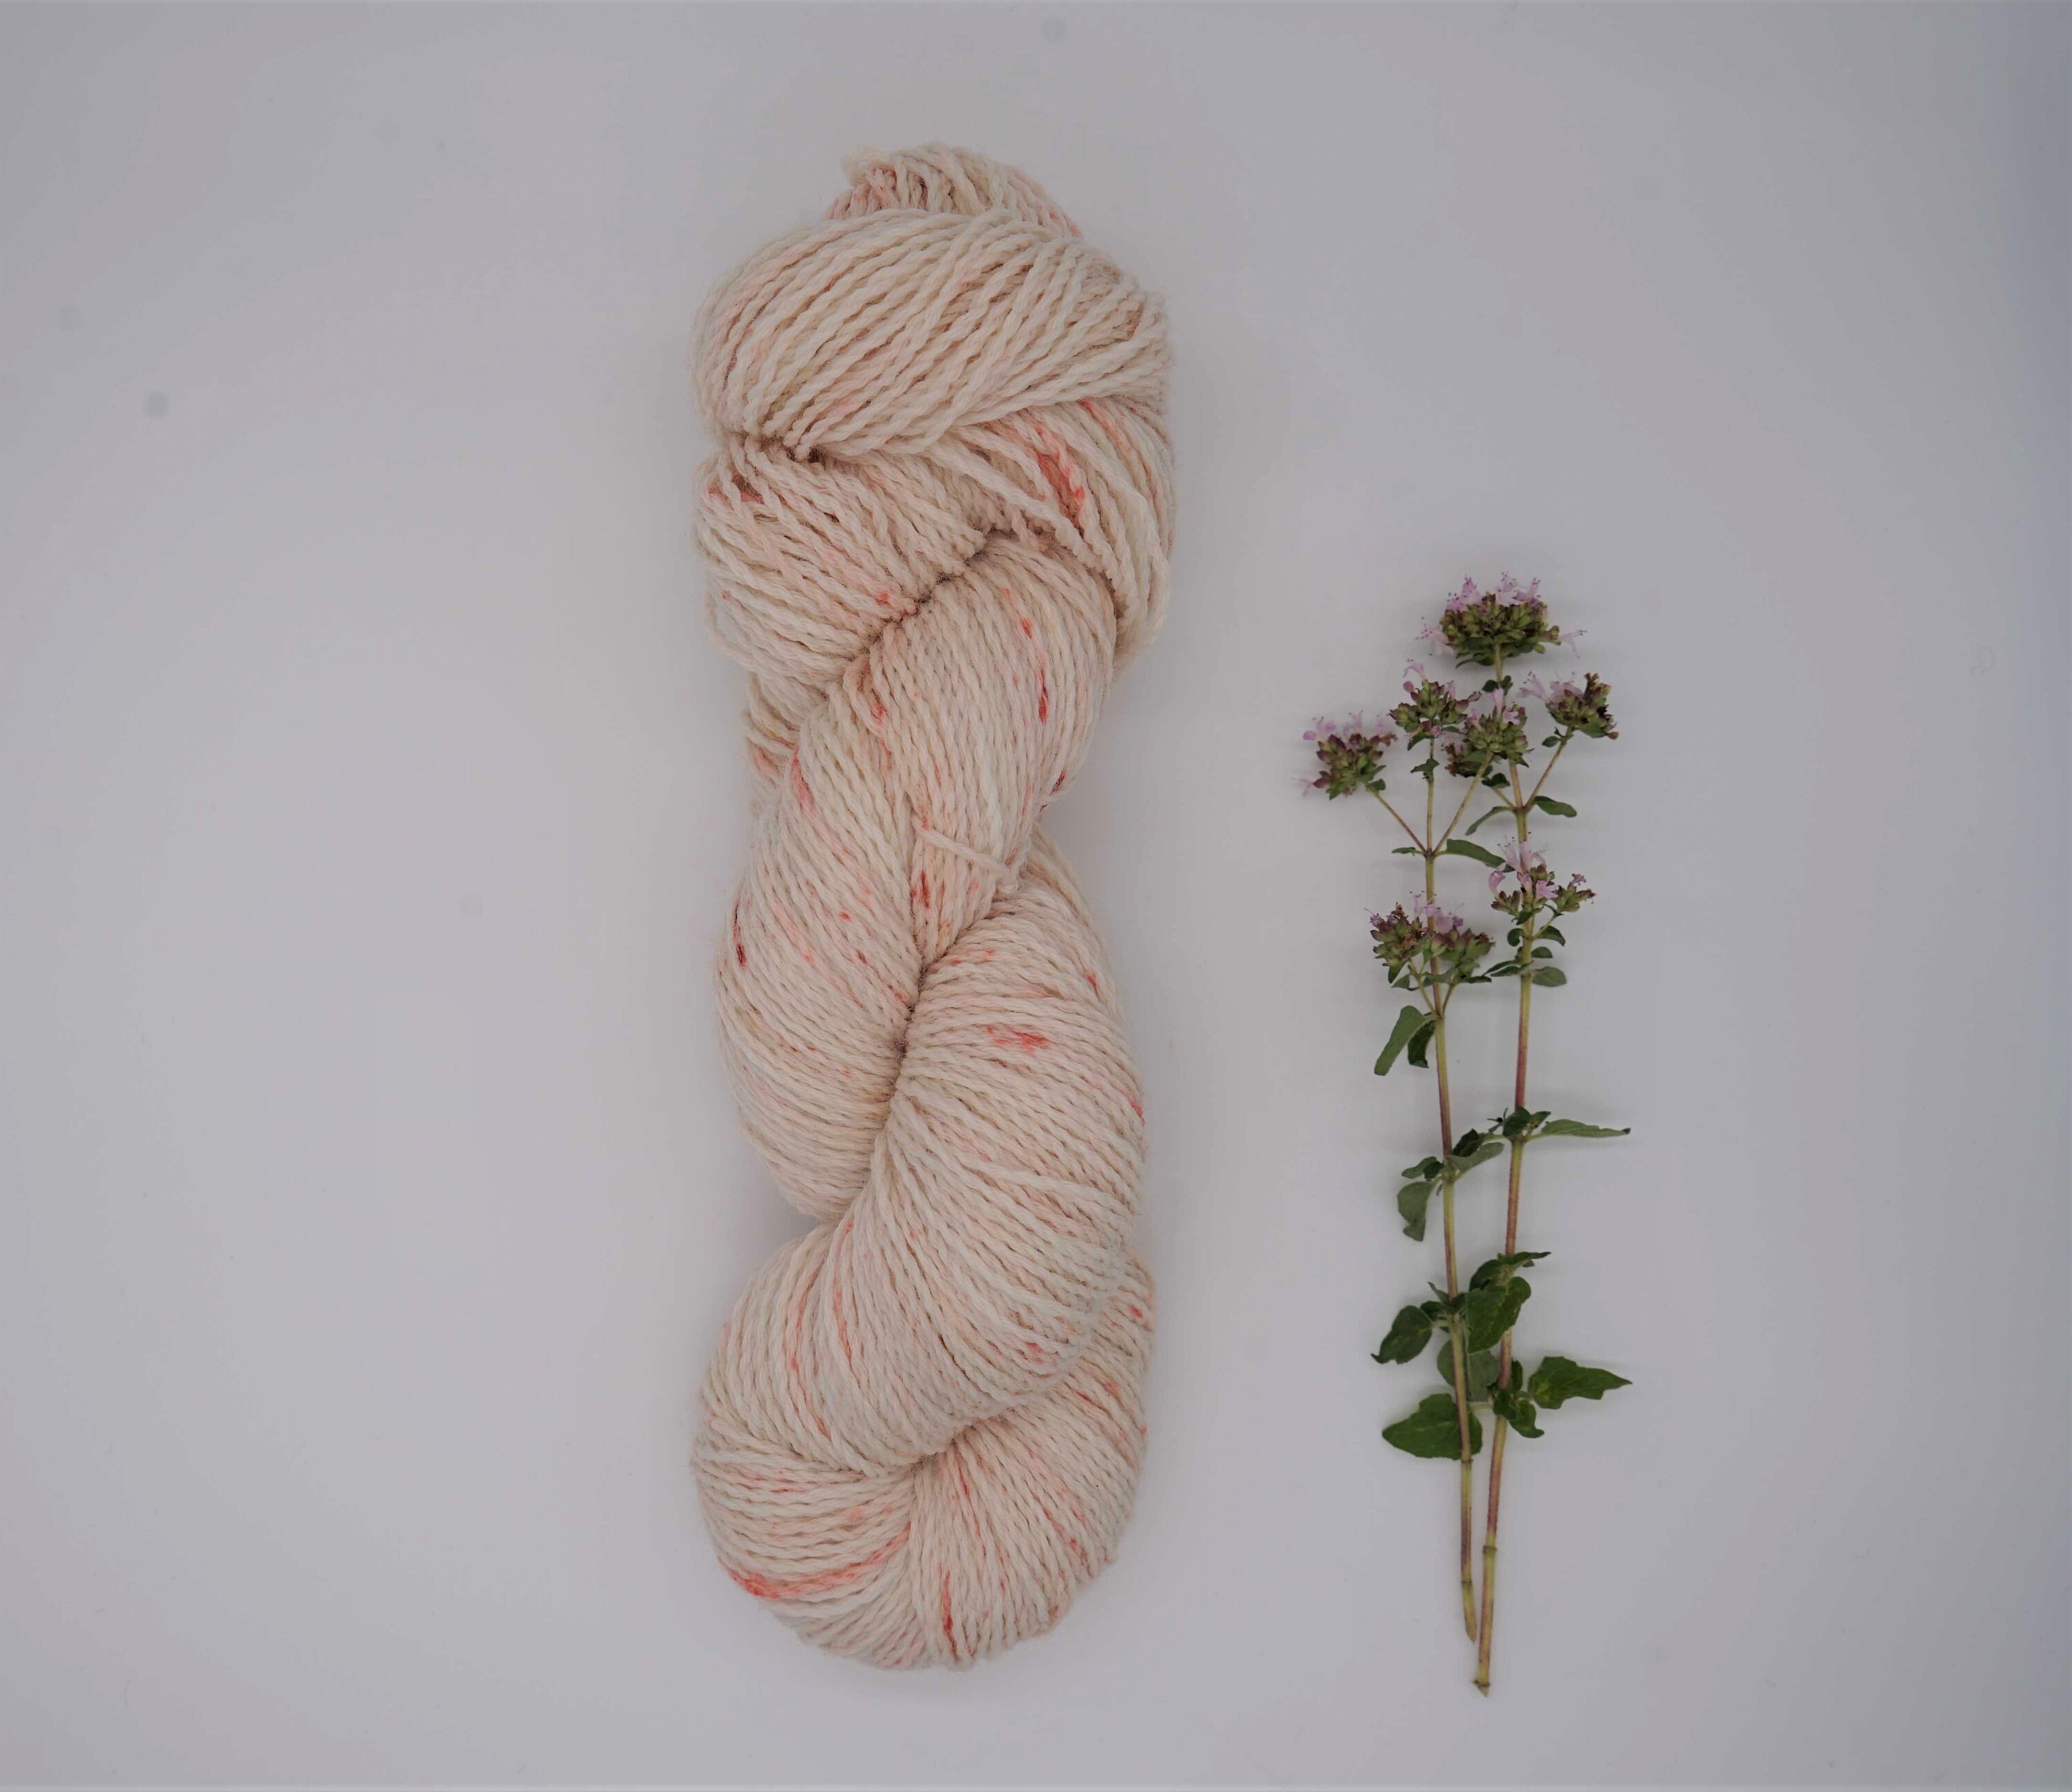 Natural Yellow Dyes for Yarn and Fabric - Rosemary And Pines Fiber